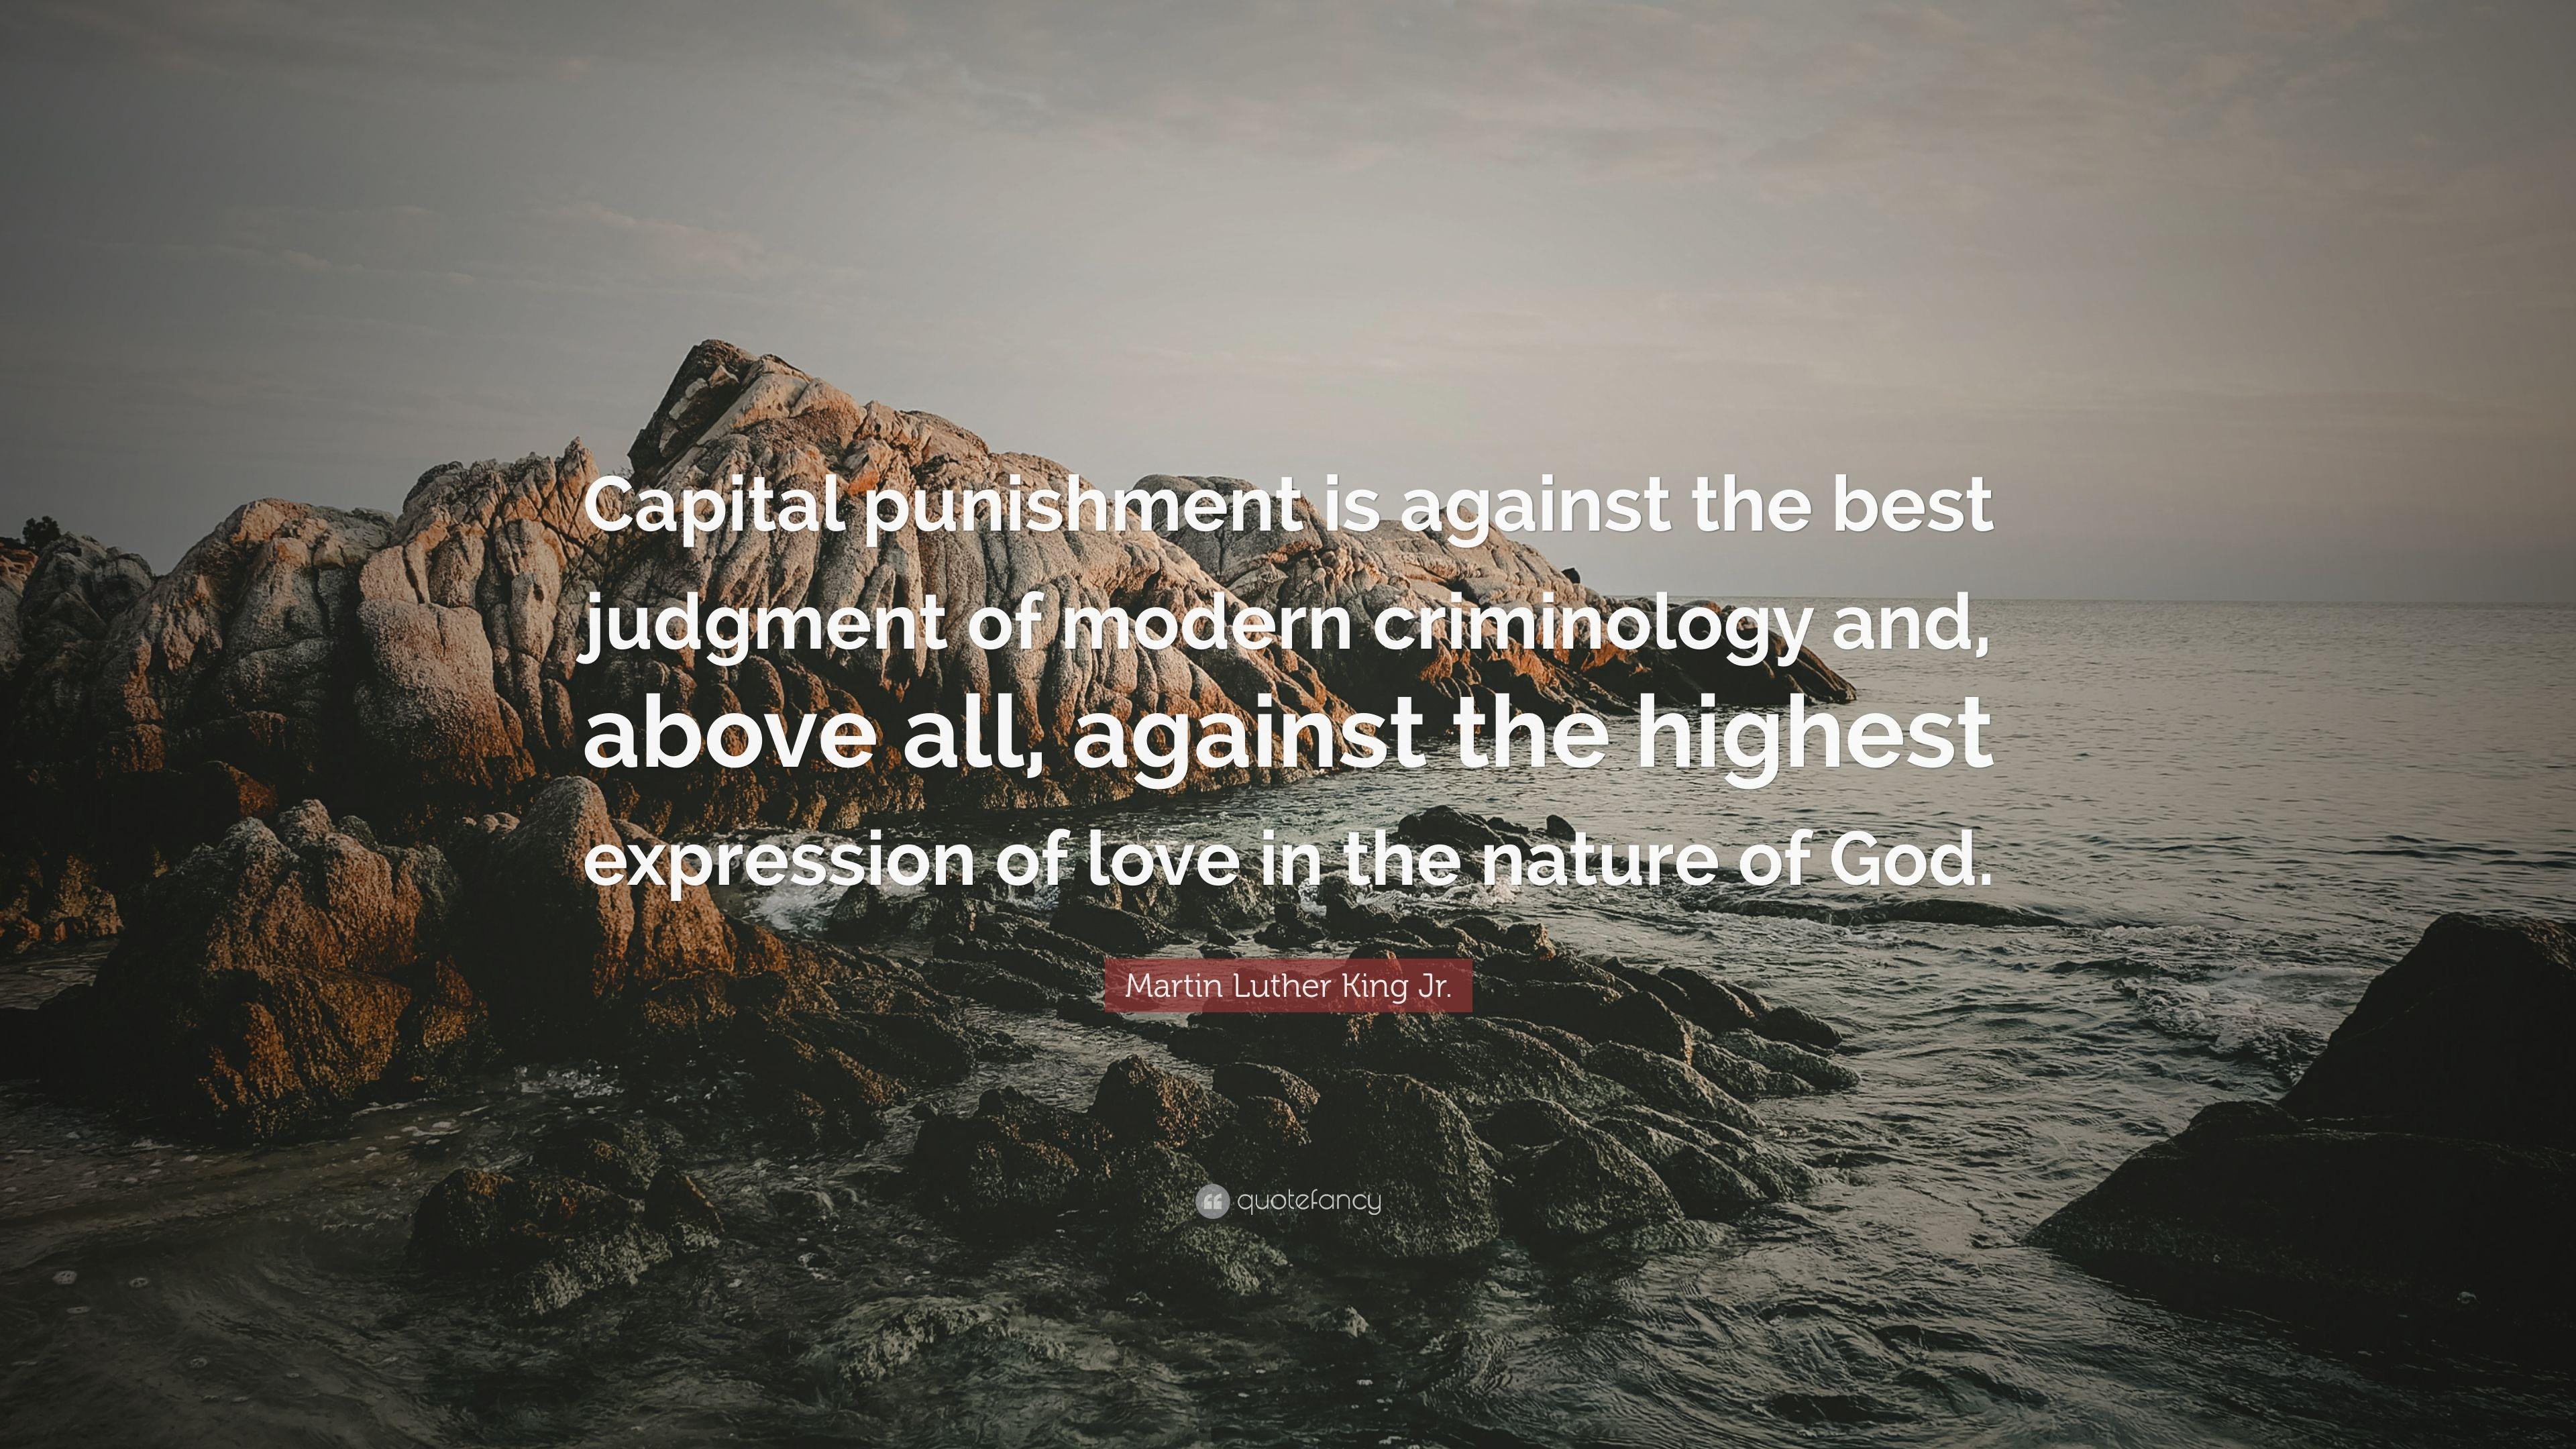 Martin Luther King Jr. Quote: “Capital punishment is against